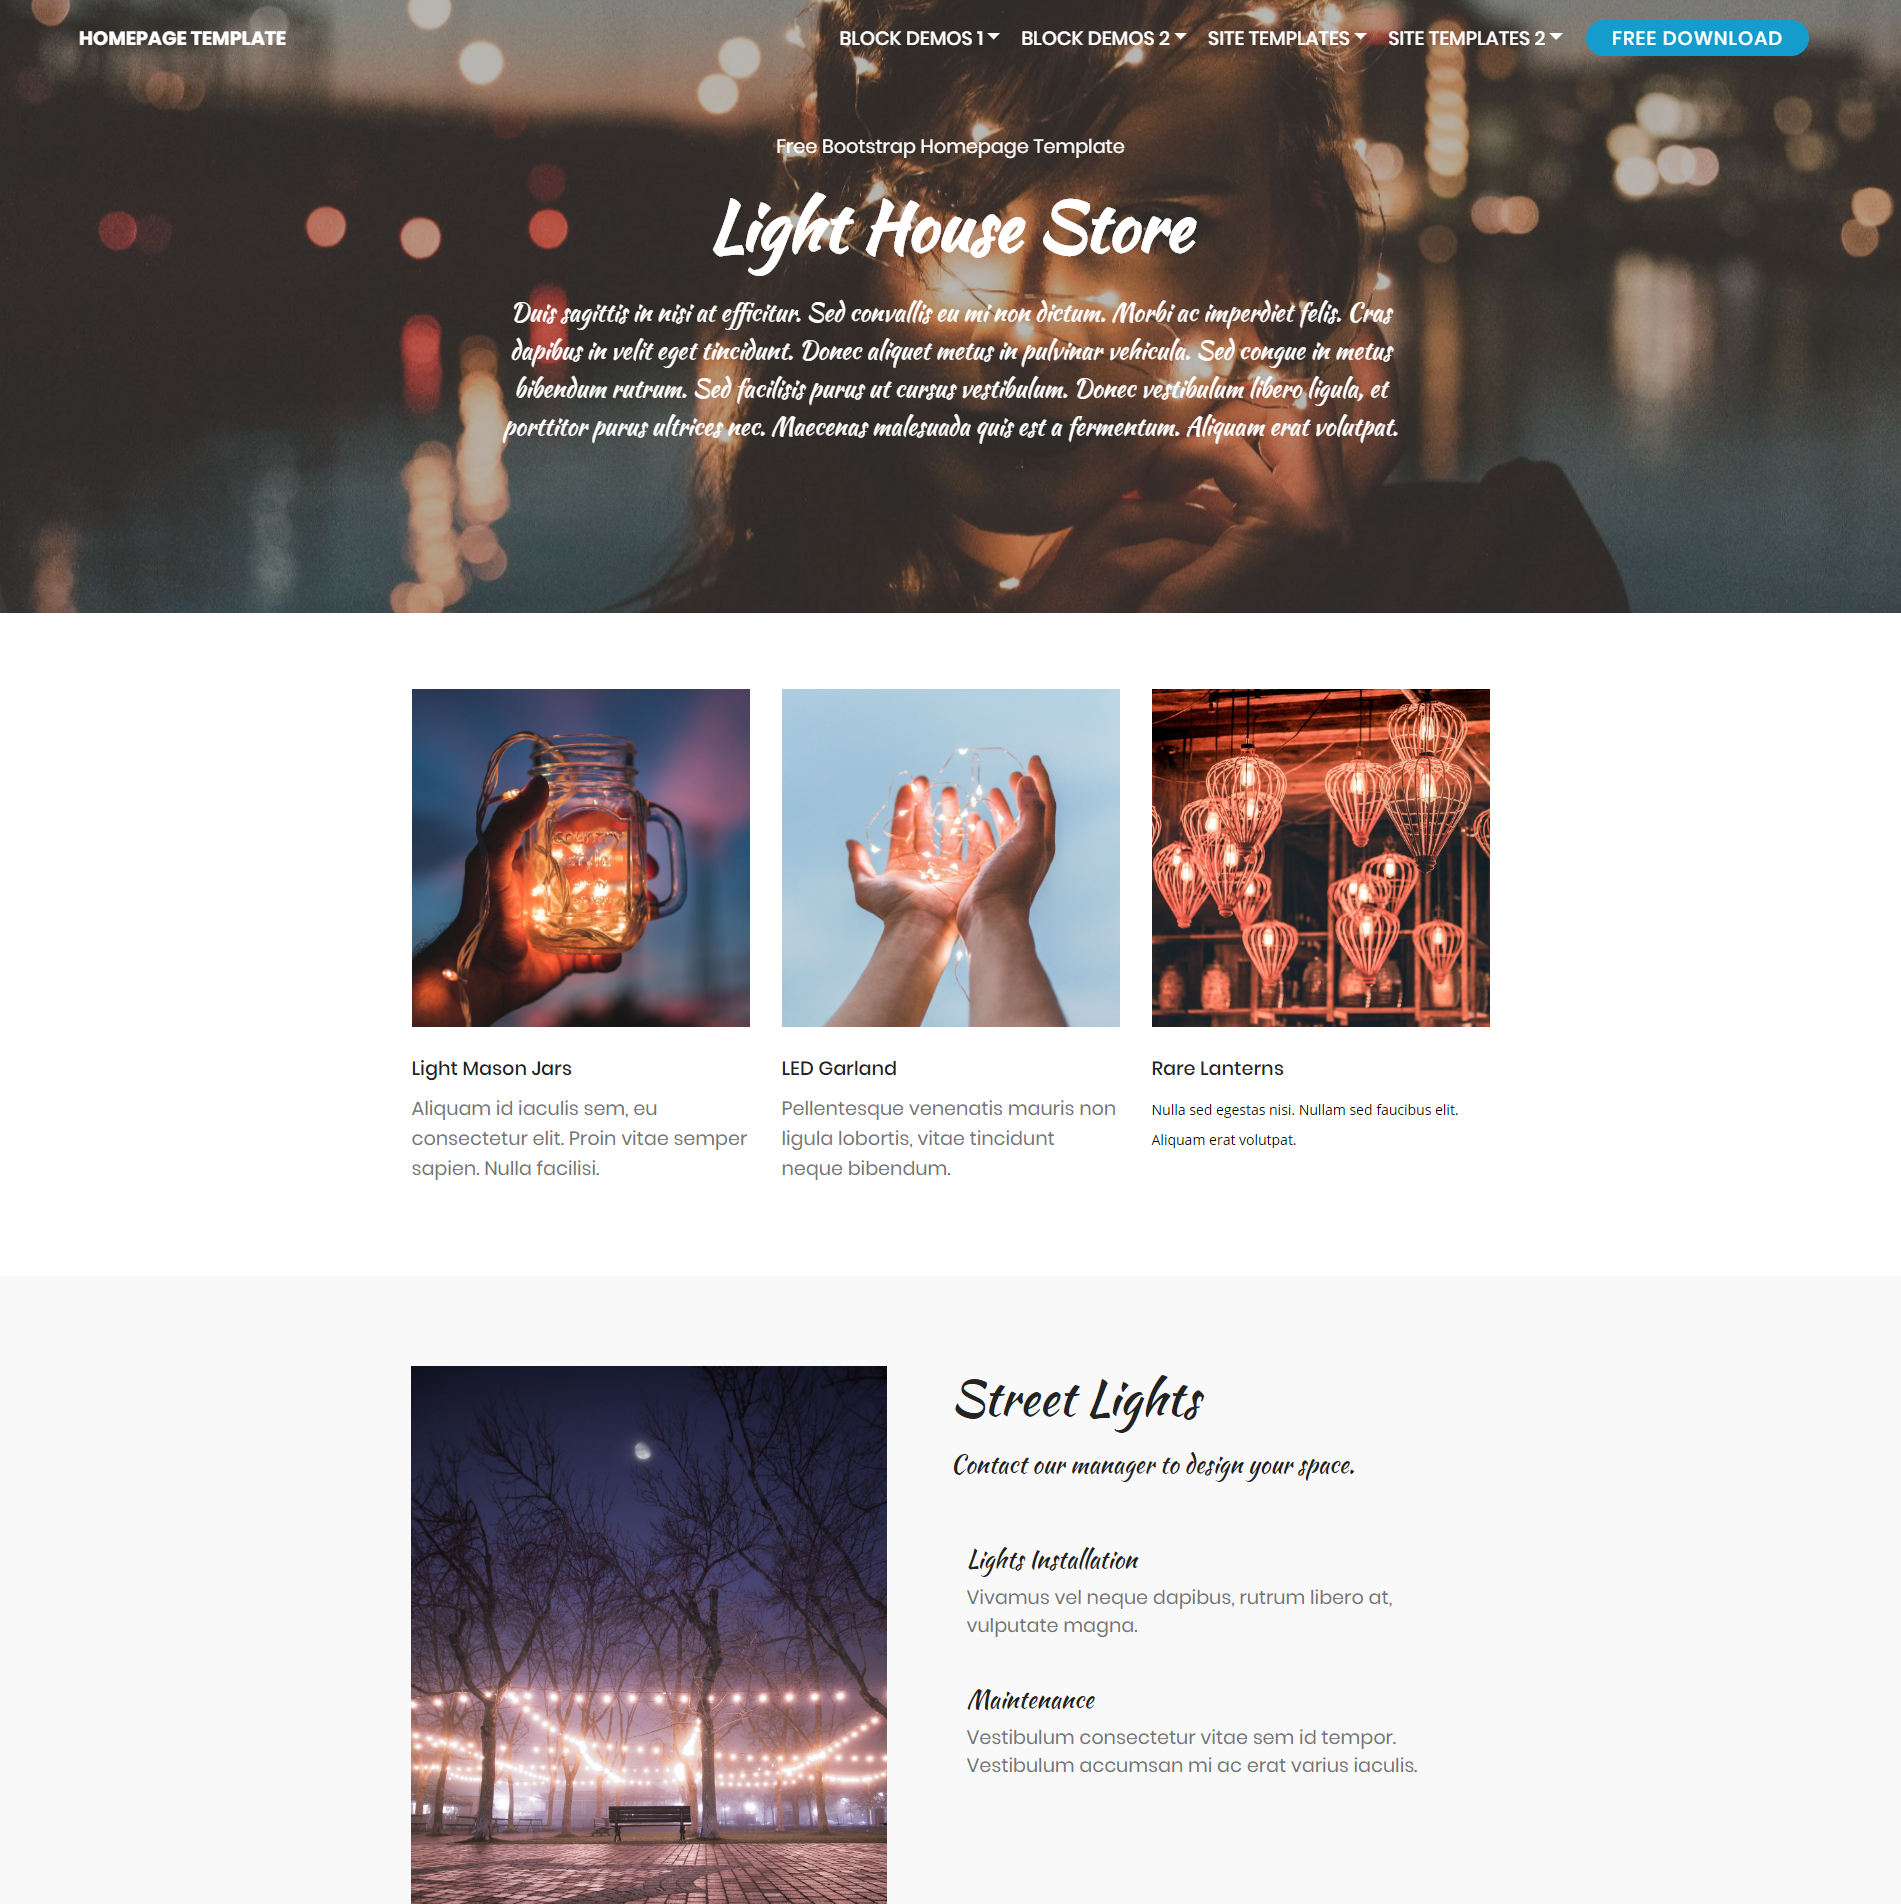 Responsive Bootstrap Homepage Templates